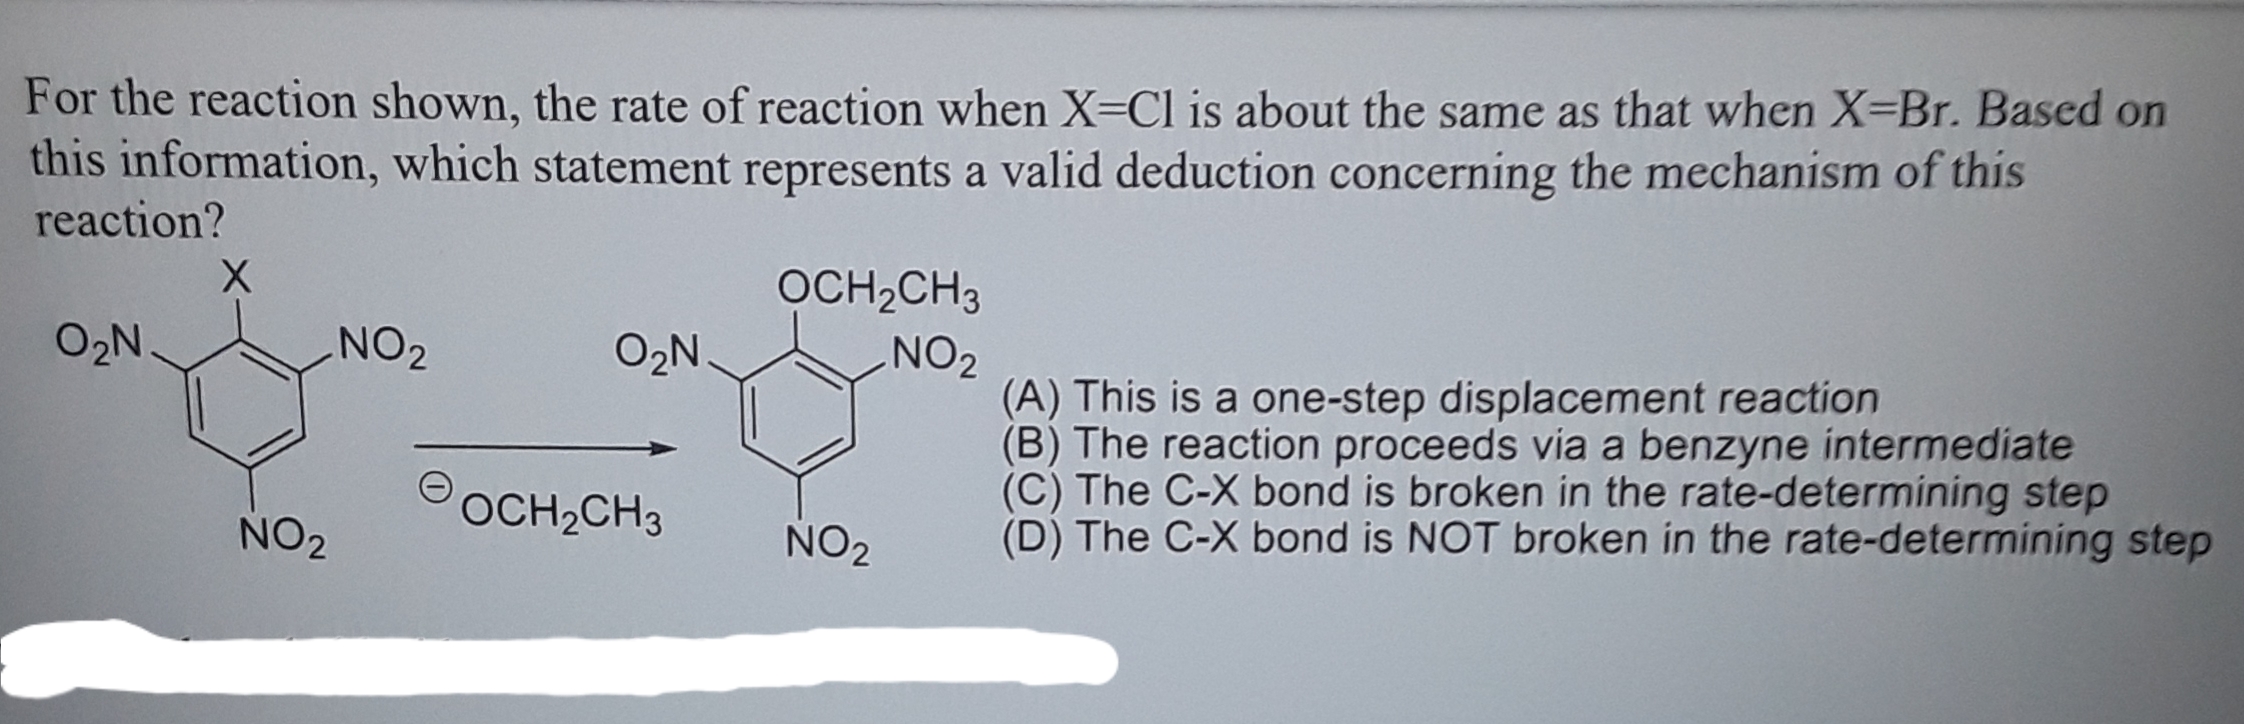 For the reaction shown, the rate of reaction when X=Cl is about the same as that when X=Br. Based on
this information, which statement represents a valid deduction concerning the mechanism of this
reaction?
OCH2CH3
O2N
NO2
NO2
(A) This is a one-step displacement reaction
(B) The reaction proceeds via a benzyne intermediate
(C) The C-X bond is broken in the rate-determining step
(D) The C-X bond is NOT broken in the rate-determining step
O2N
OCH,CH3
NO2
NO2
